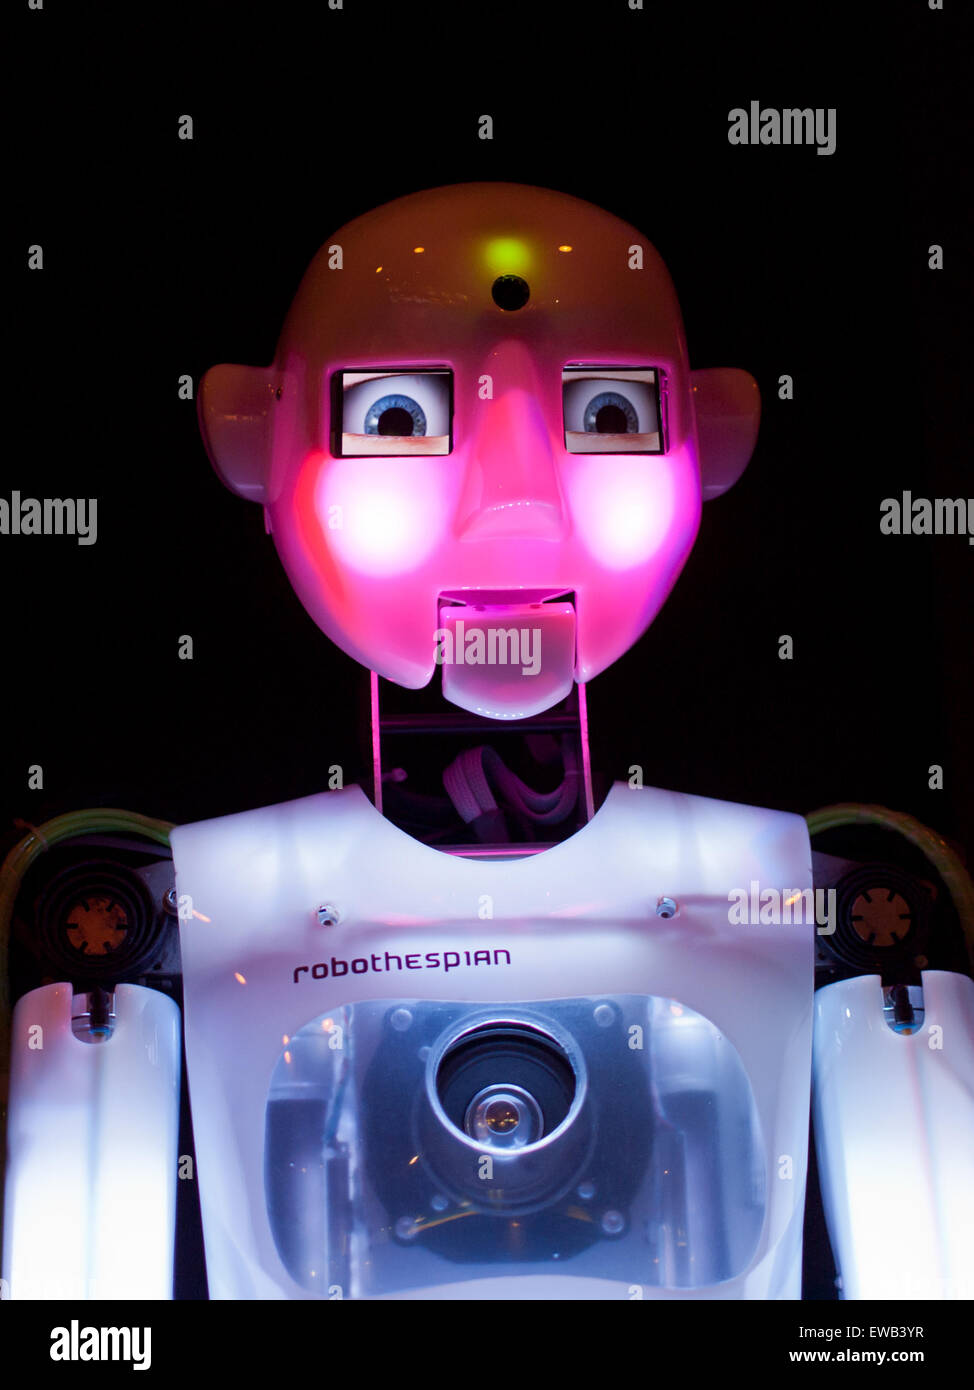 A view of RoboThespian, a life-sized, humanoid, interactive robot at the Telus World of Science at Edmonton, Alberta, Canada. Stock Photo